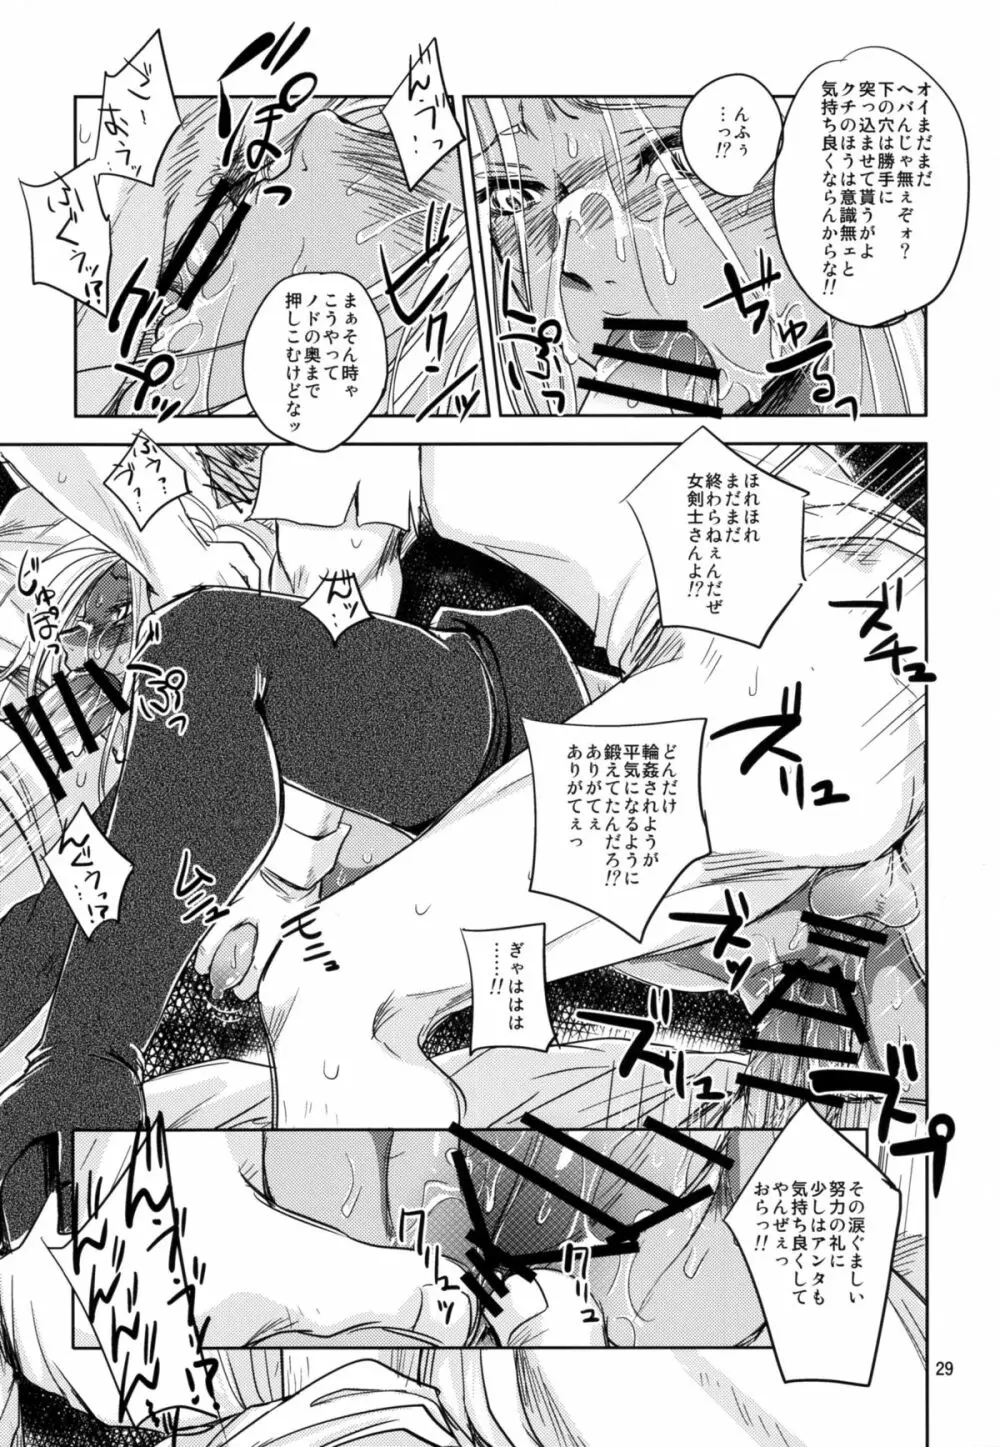 GRASSEN'S WAR ANOTHER STORY Ex #04 ノード侵攻 IV Page.29